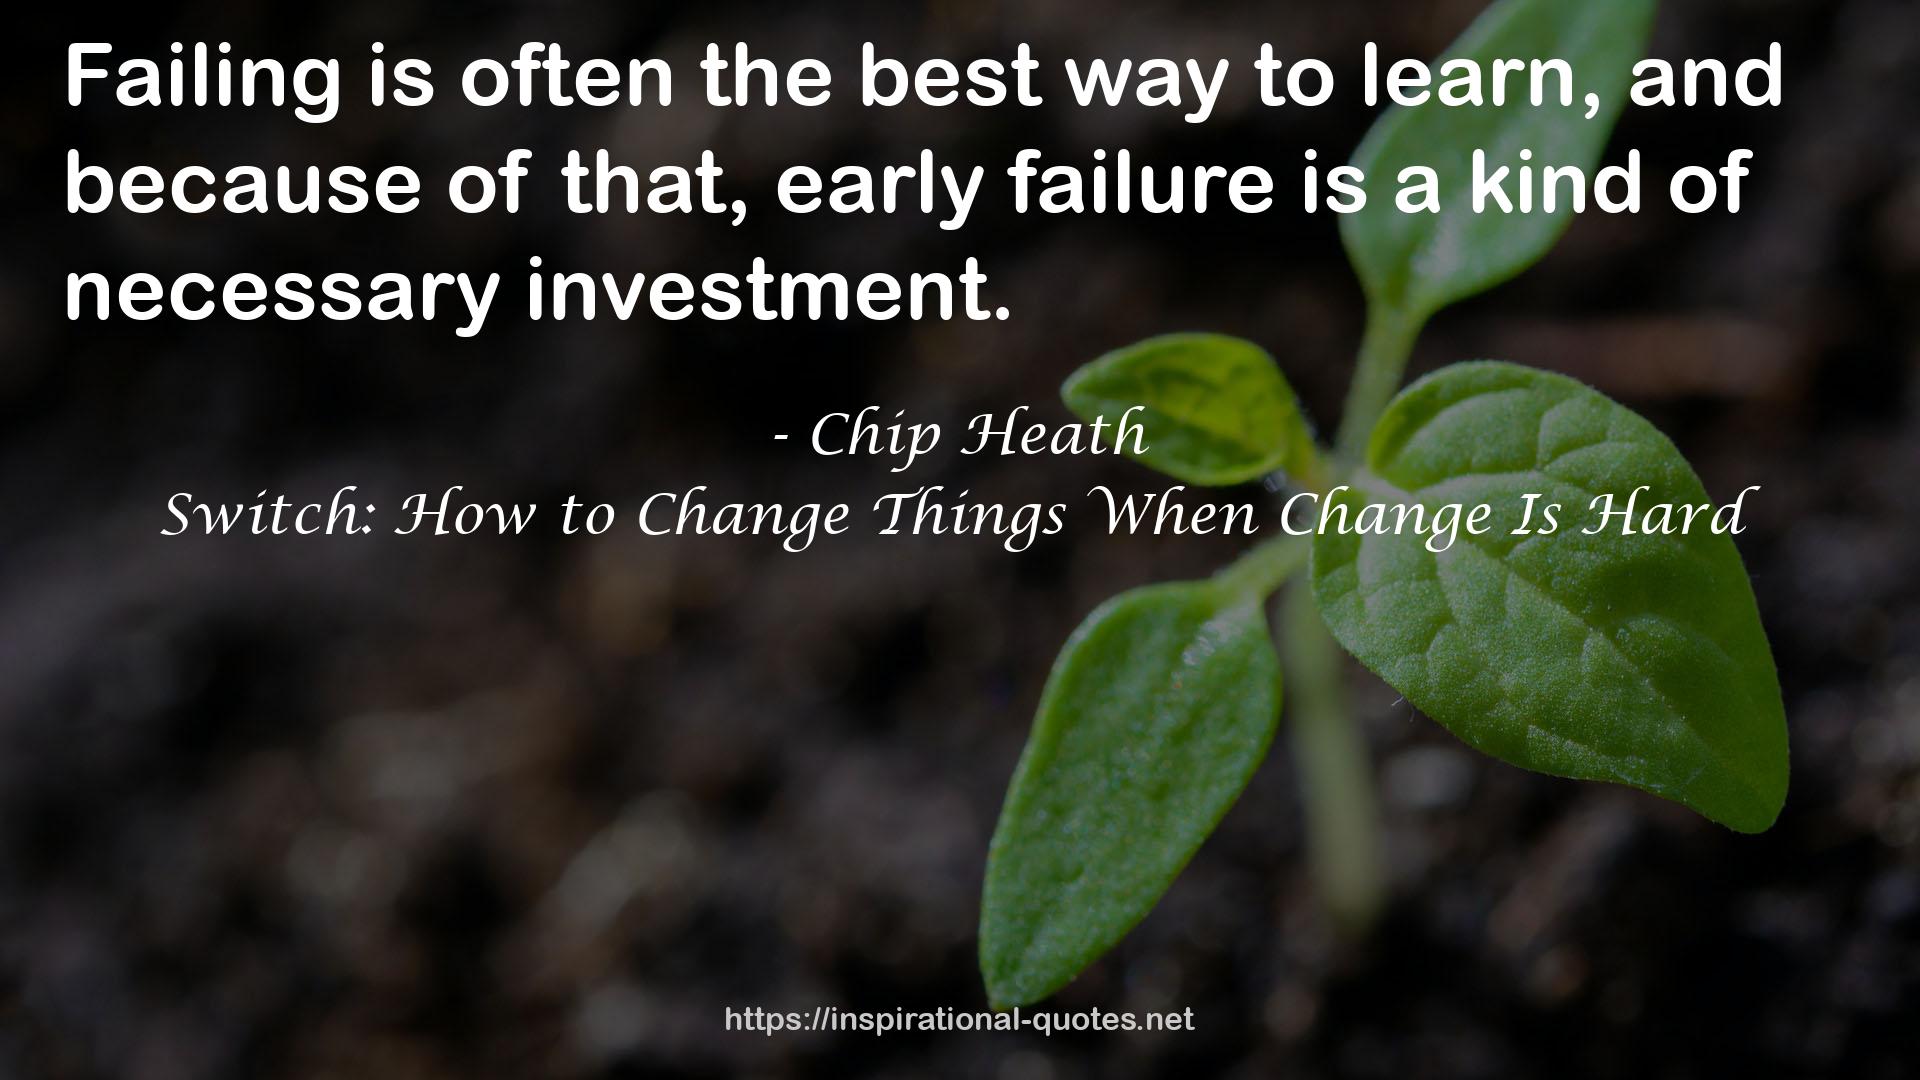 Switch: How to Change Things When Change Is Hard QUOTES